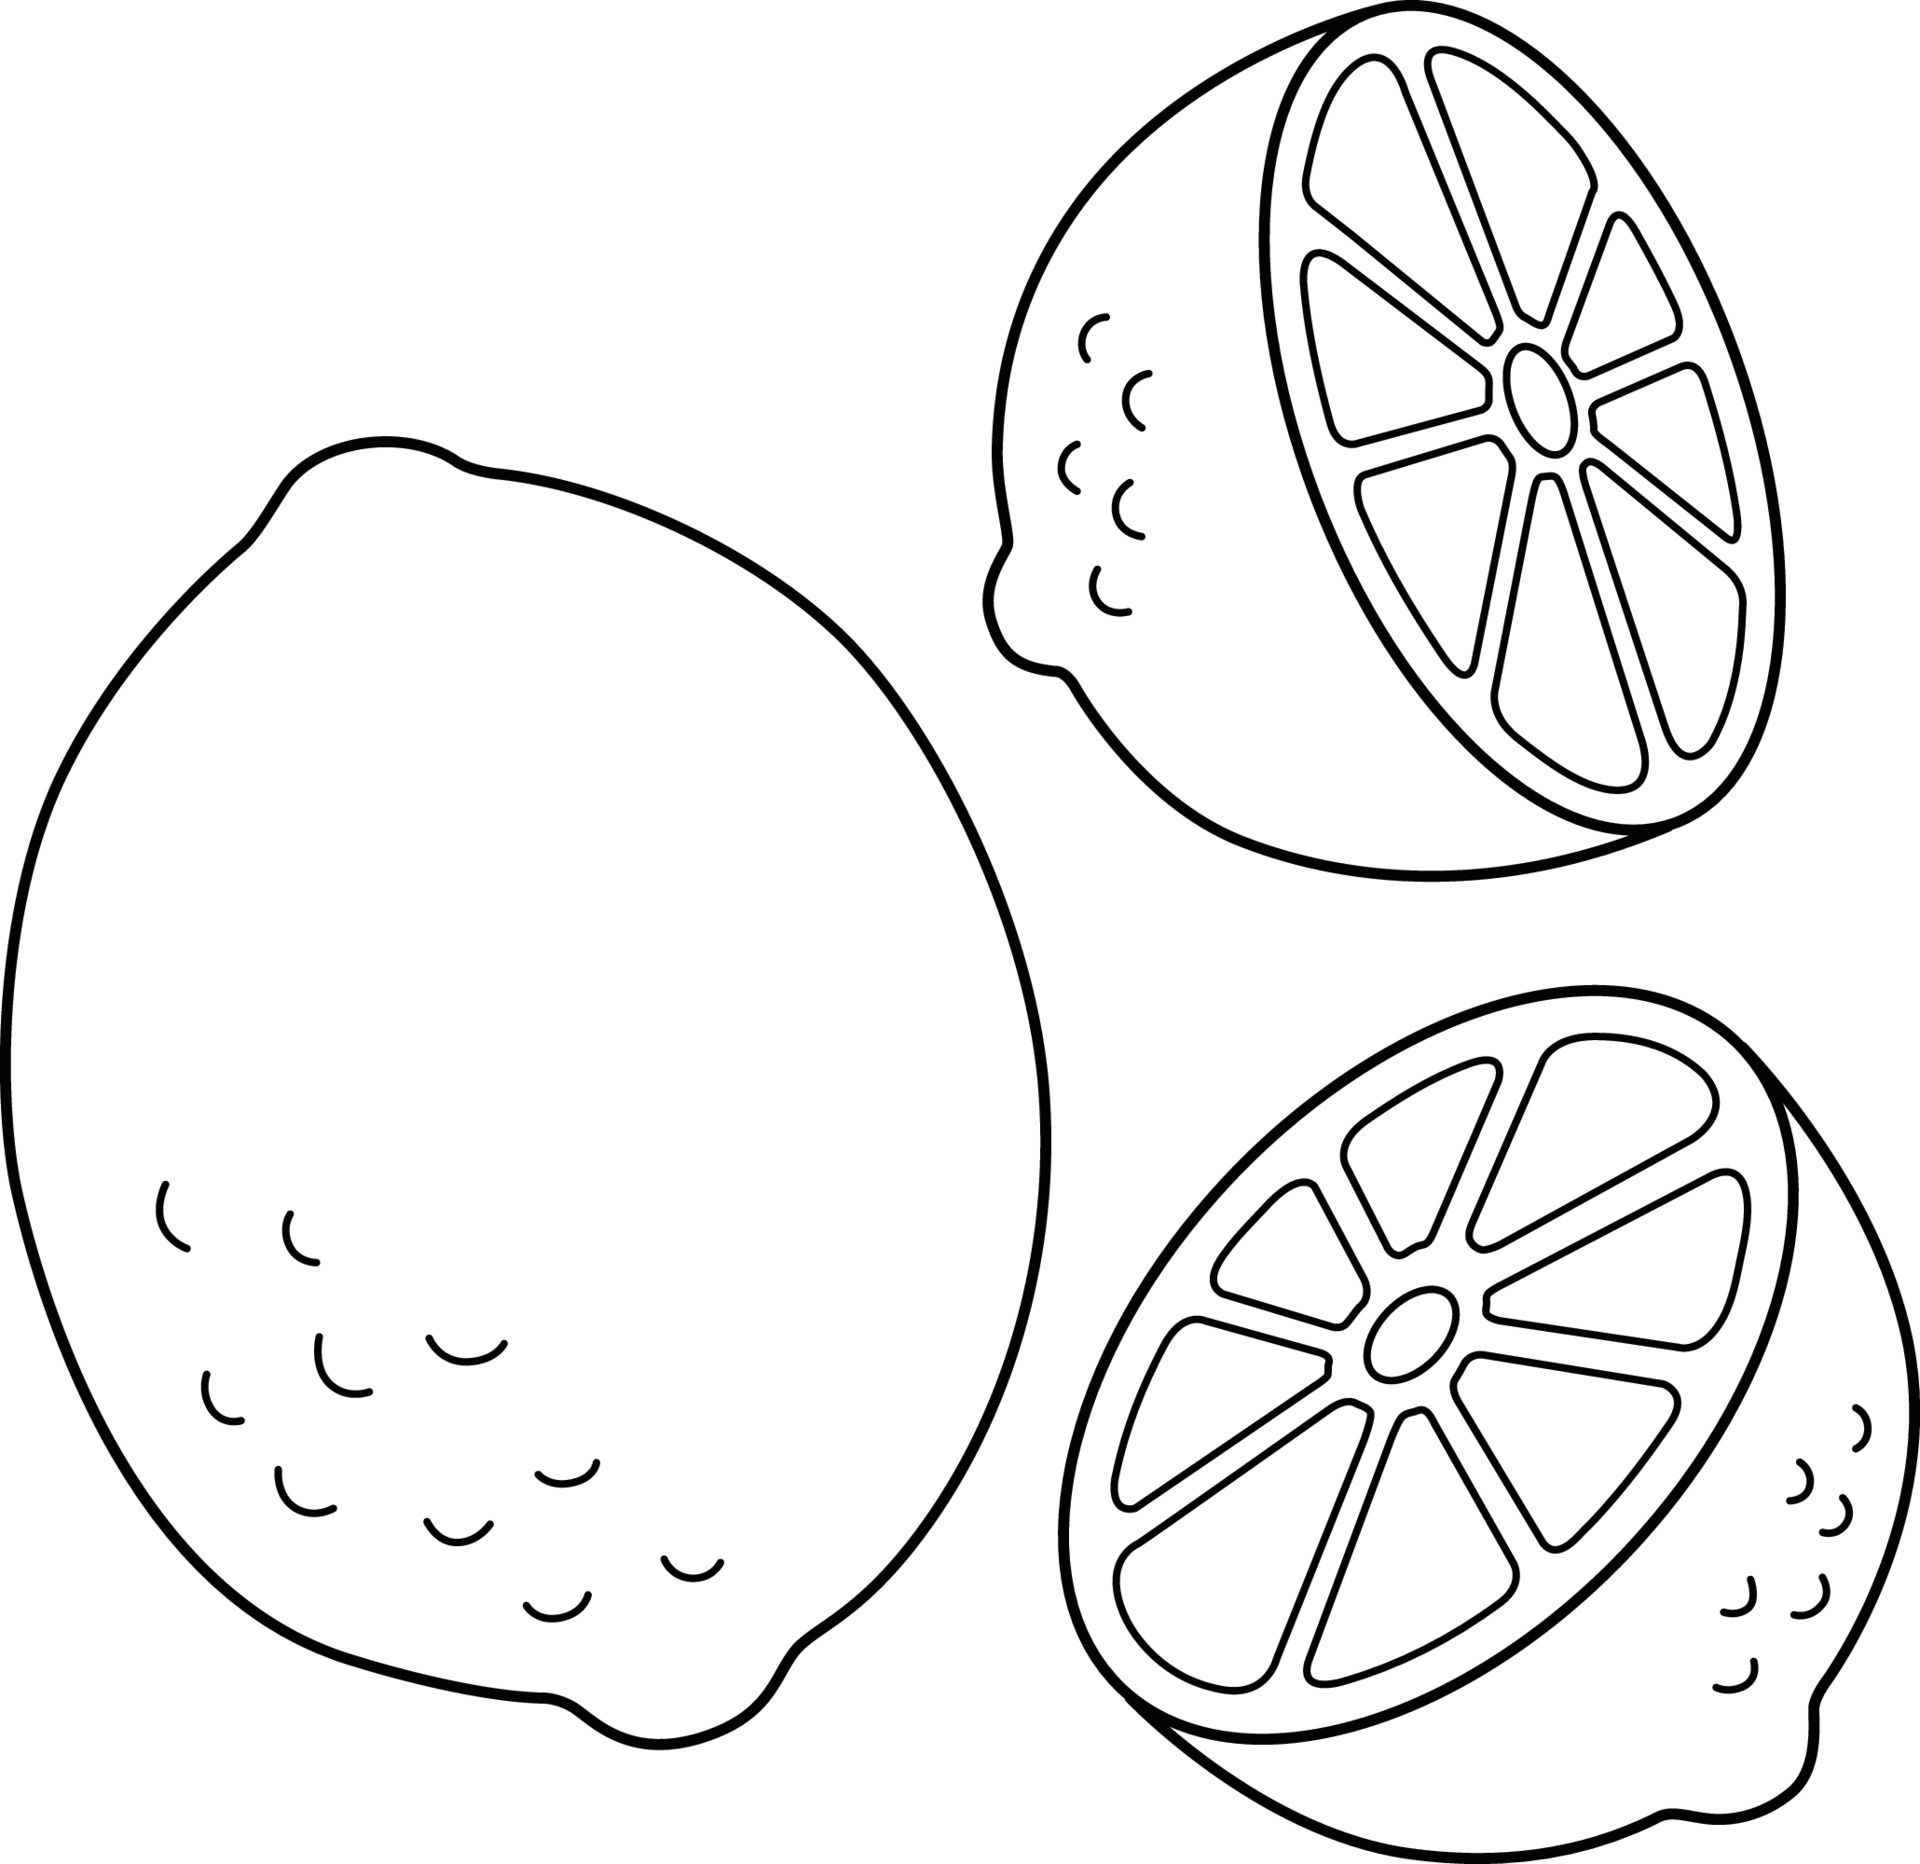 Lemon Fruit Isolated Coloring Page for Kids 11487084 Vector Art at Vecteezy